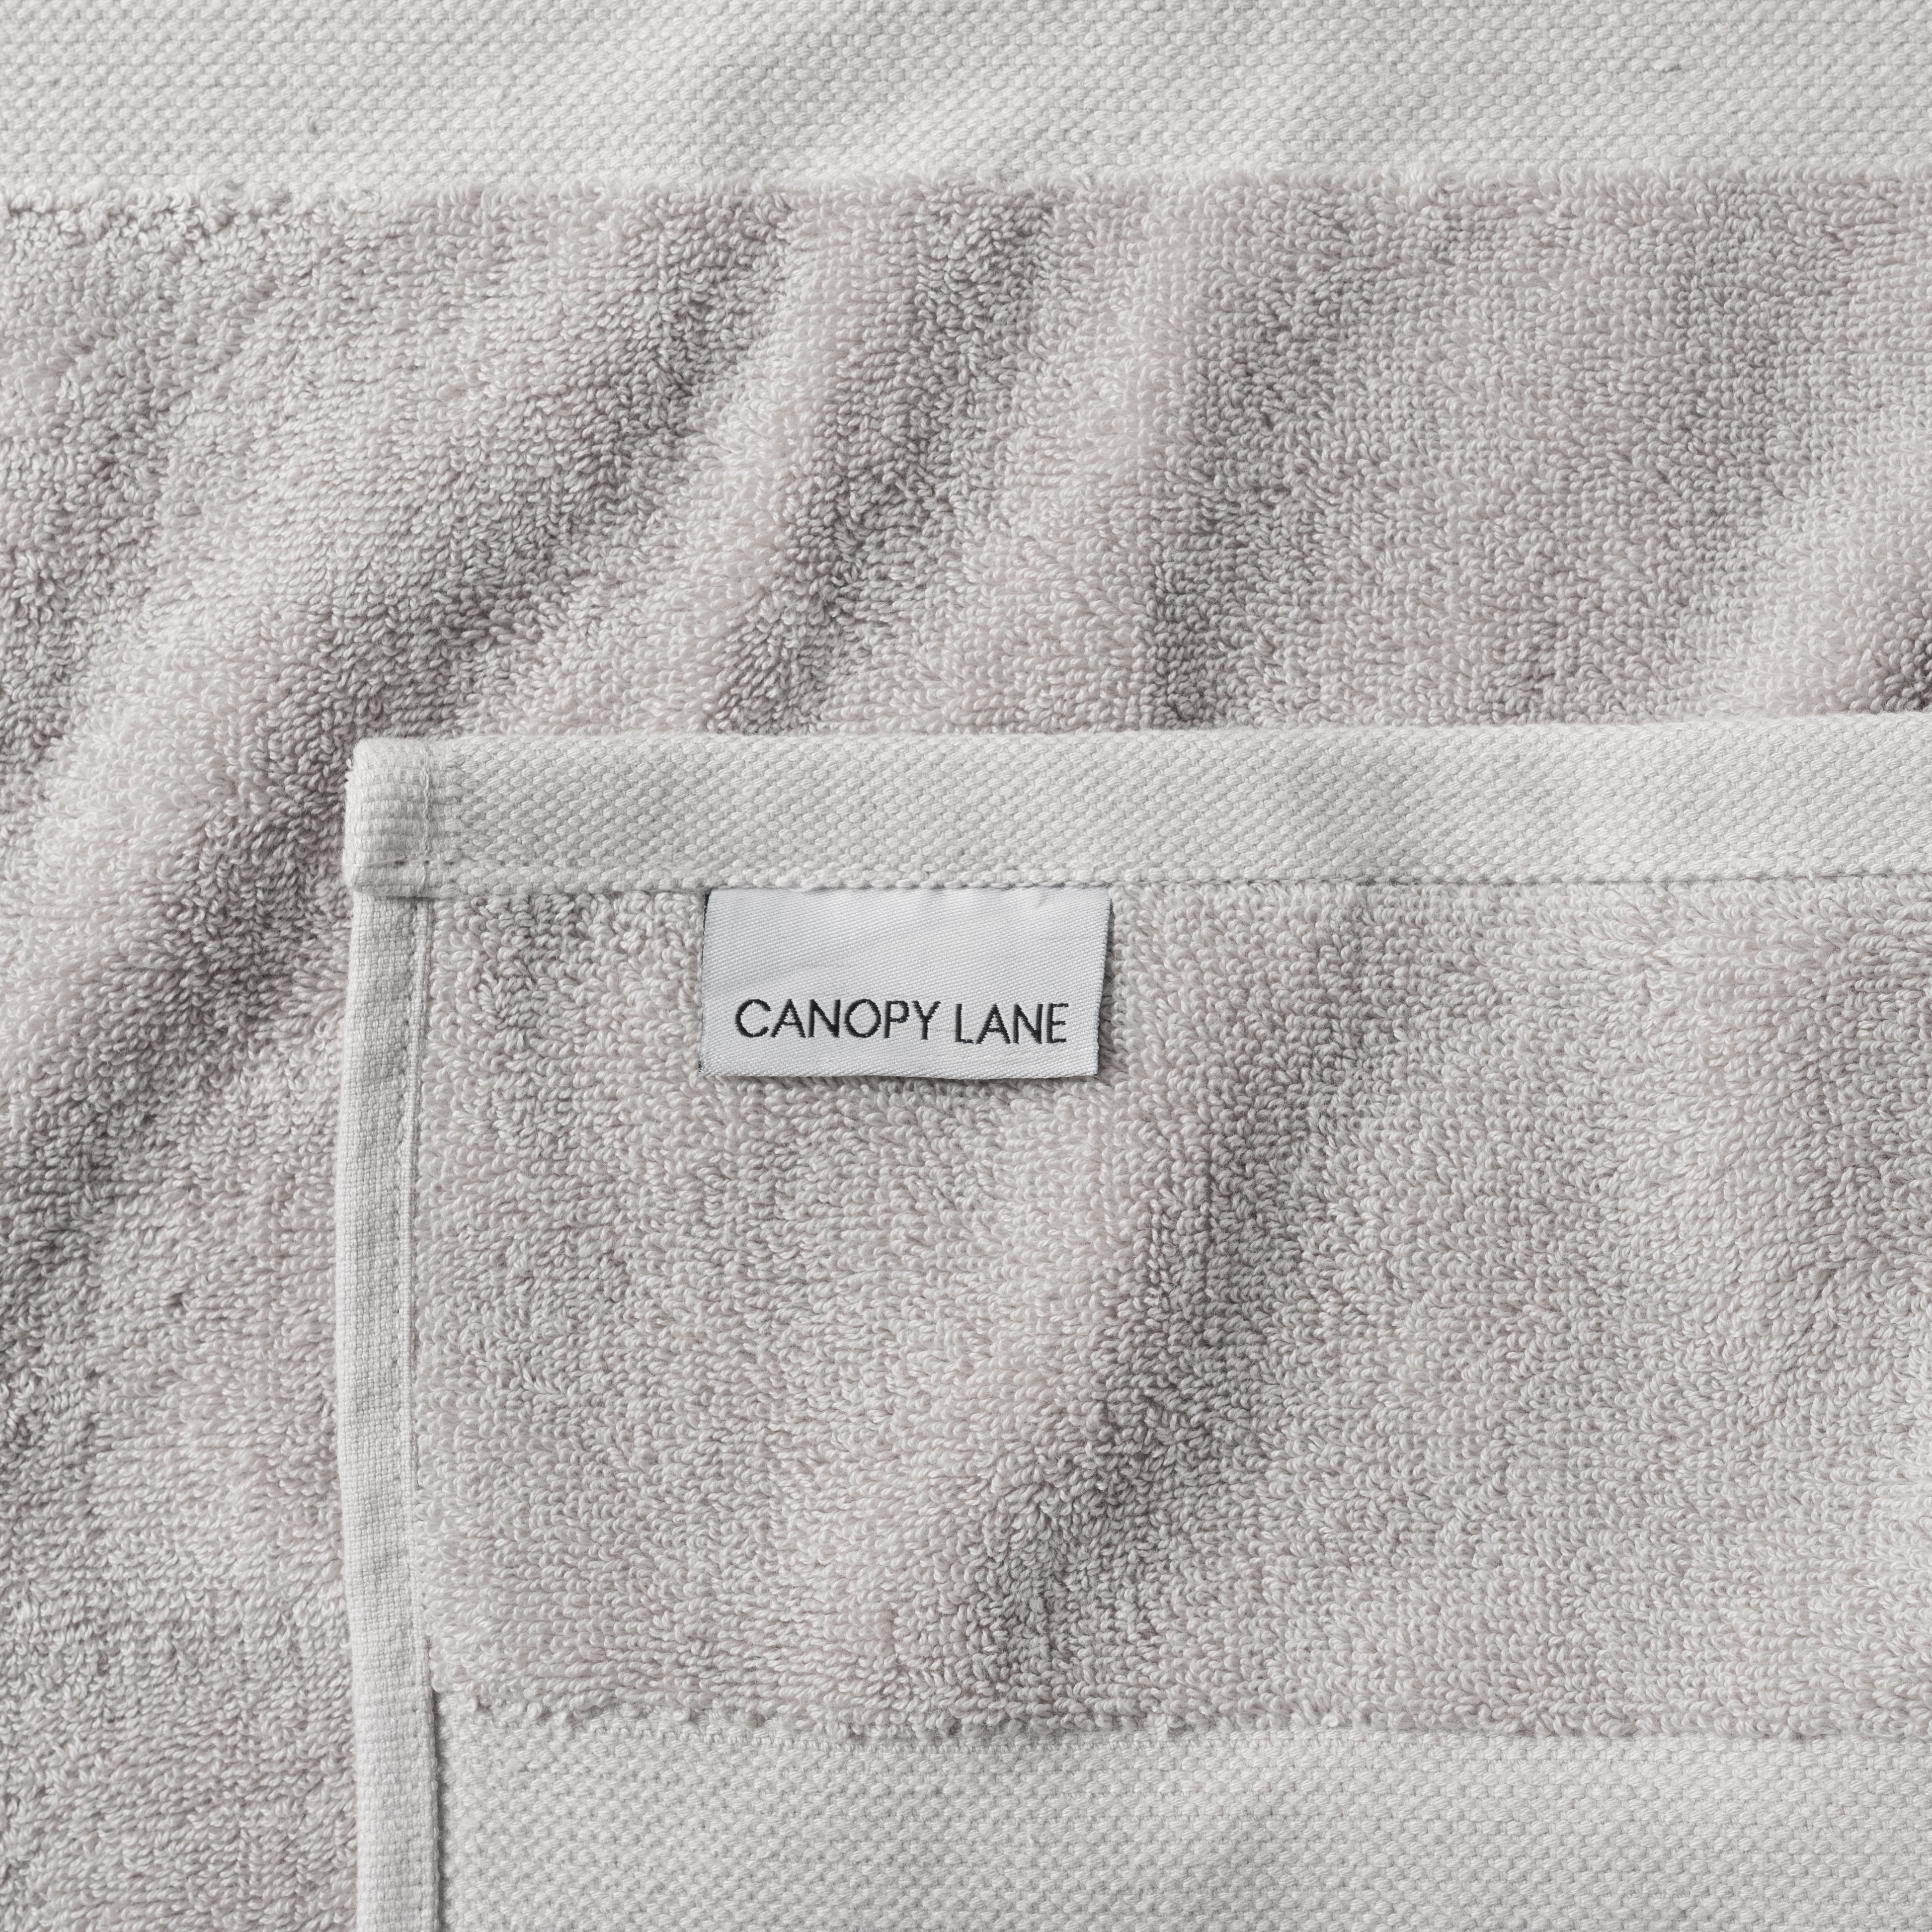 Classic Organic Towel in Silver by Under The Canopy